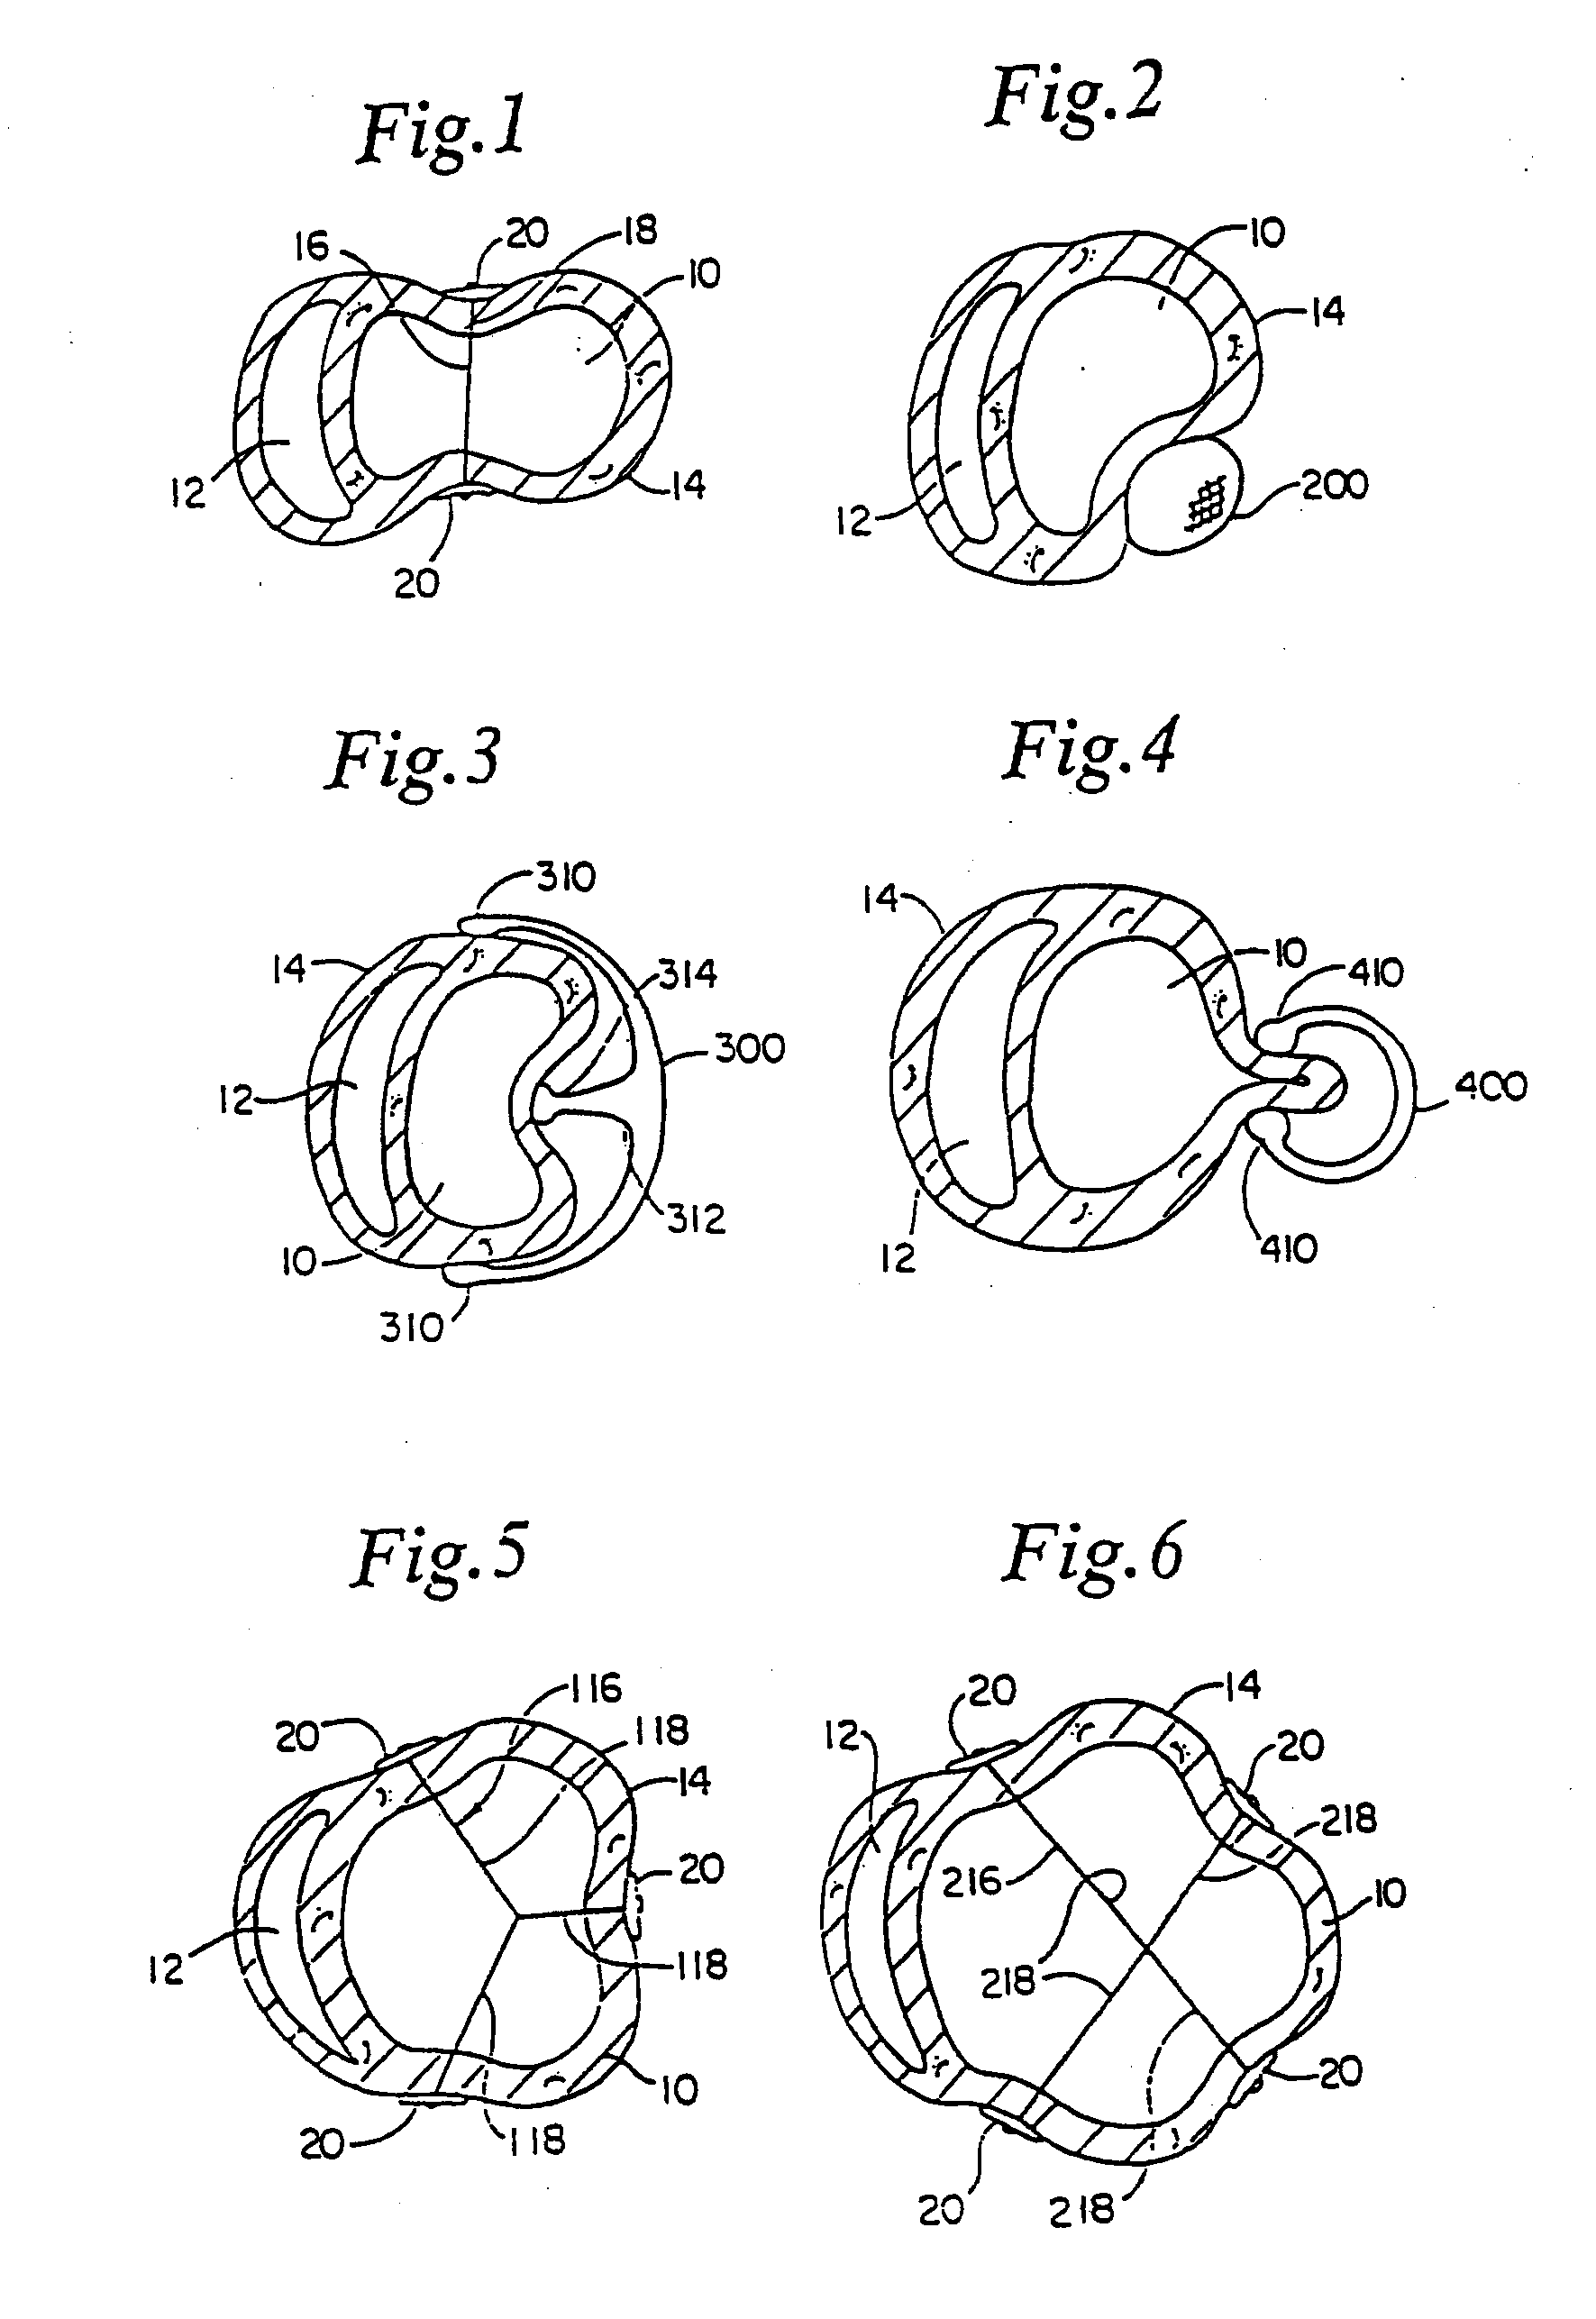 Heart wall tension reduction apparatus